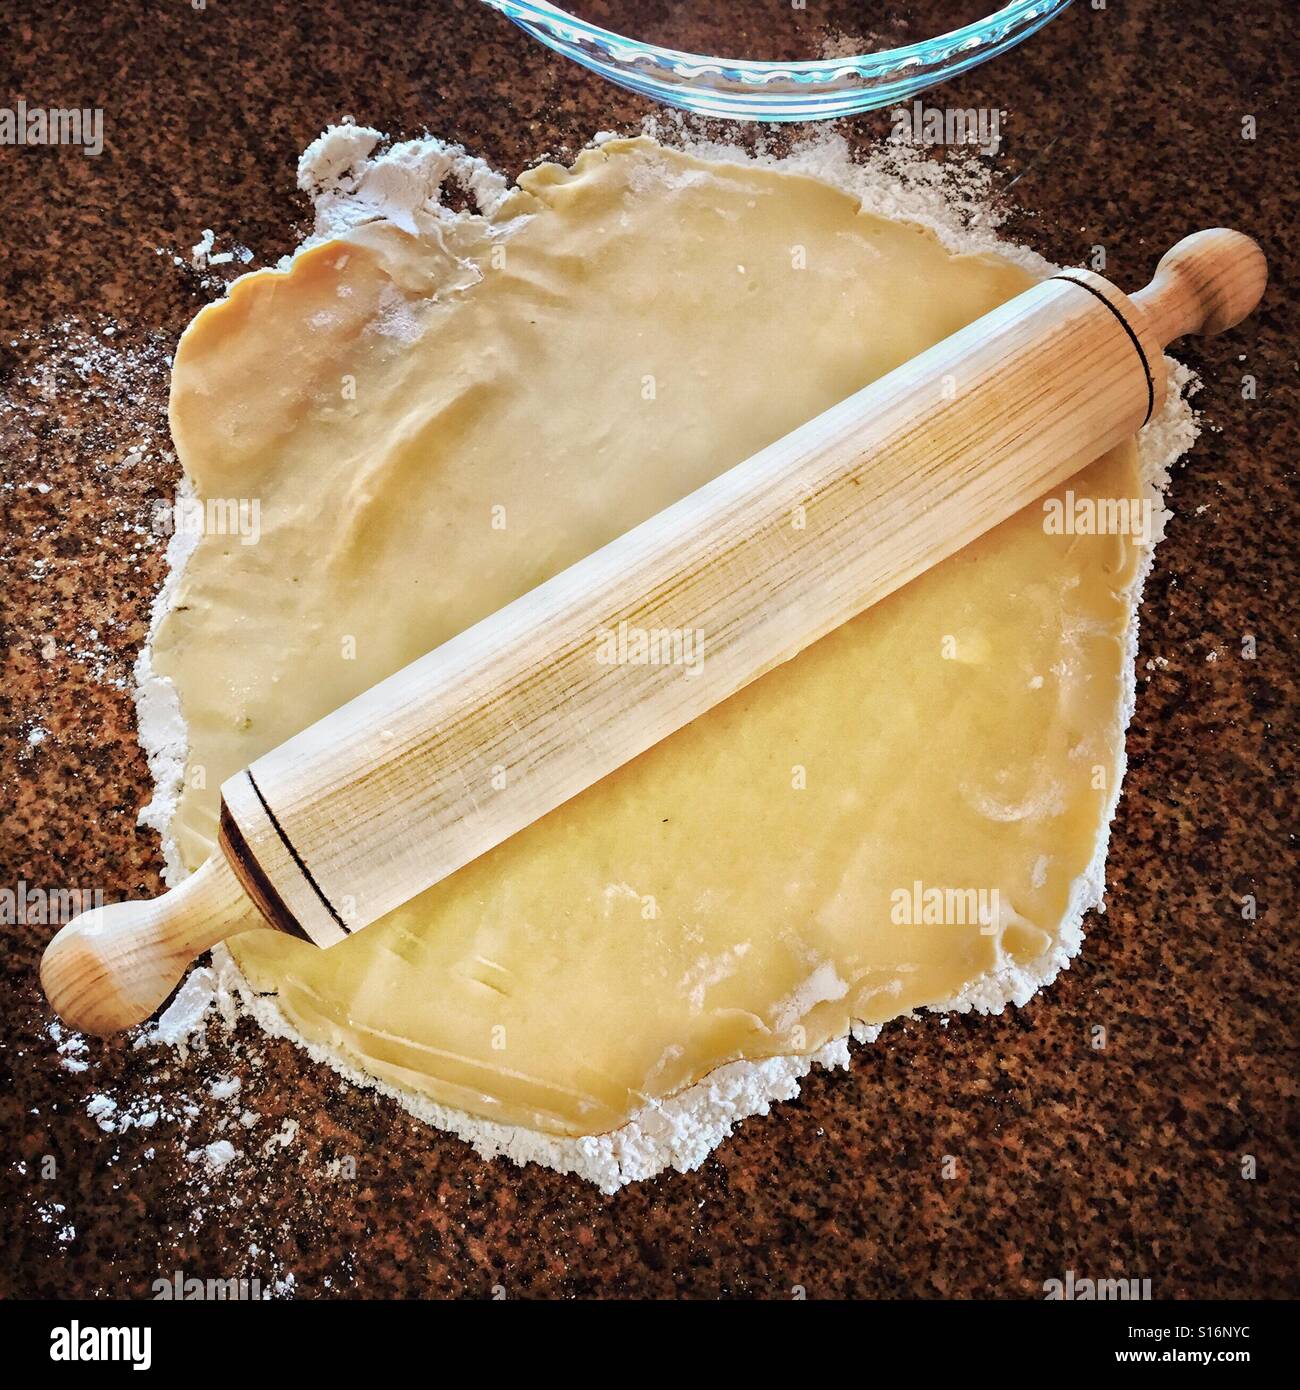 Homemade pie dough is being flattened by a rolling pin. Stock Photo